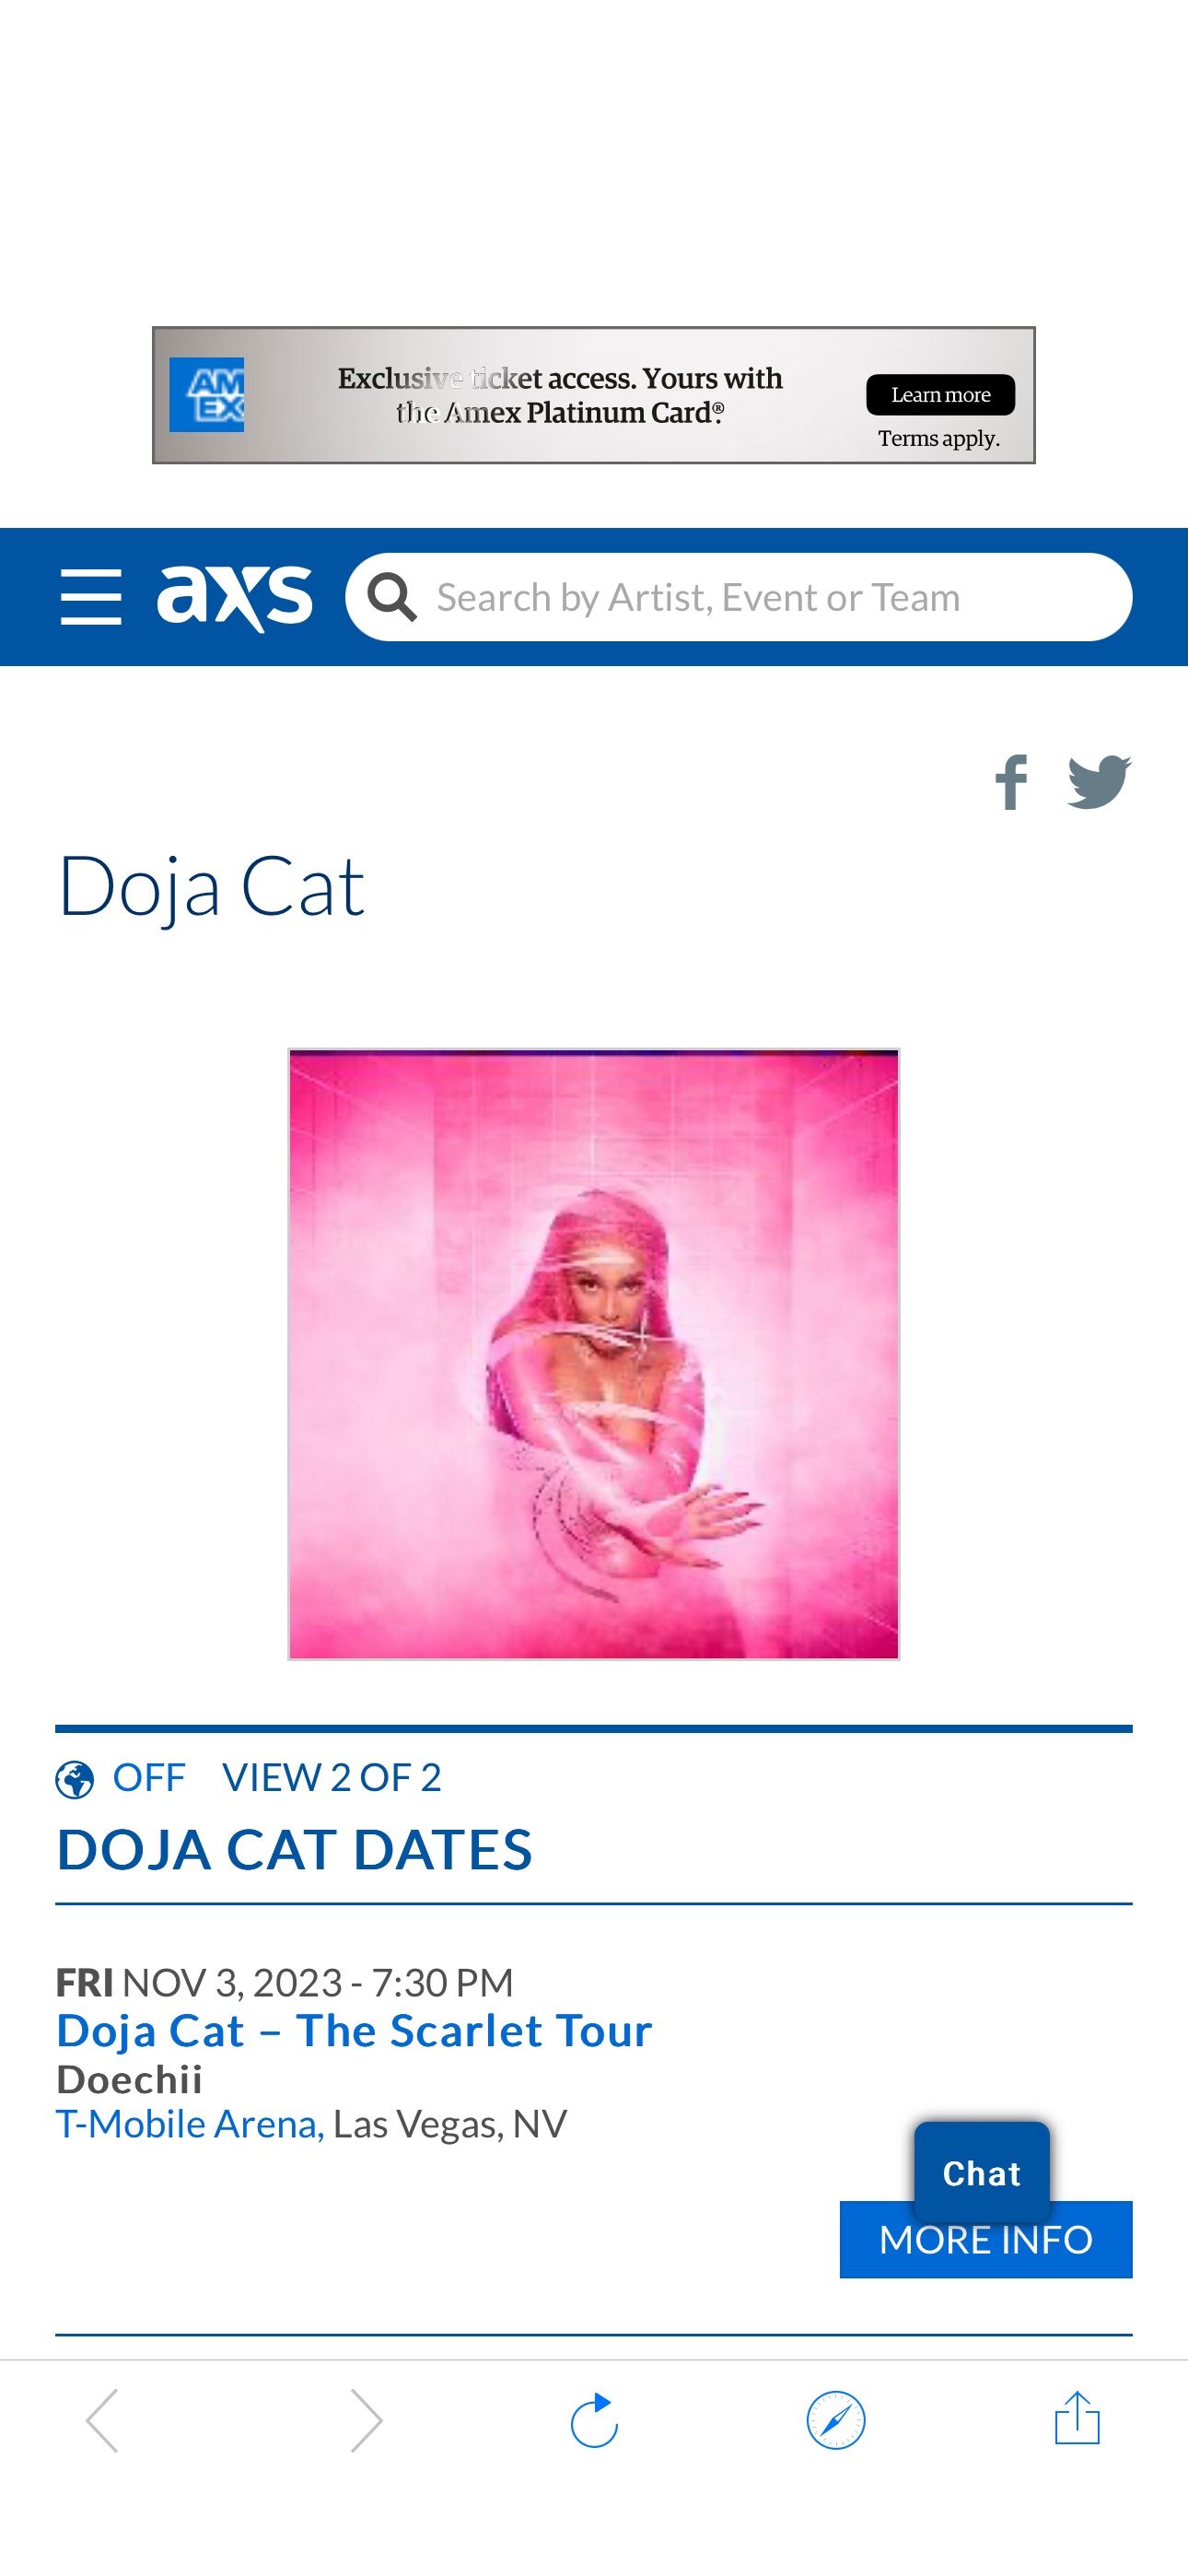 Doja Cat schedule, dates, events, and tickets - AXS